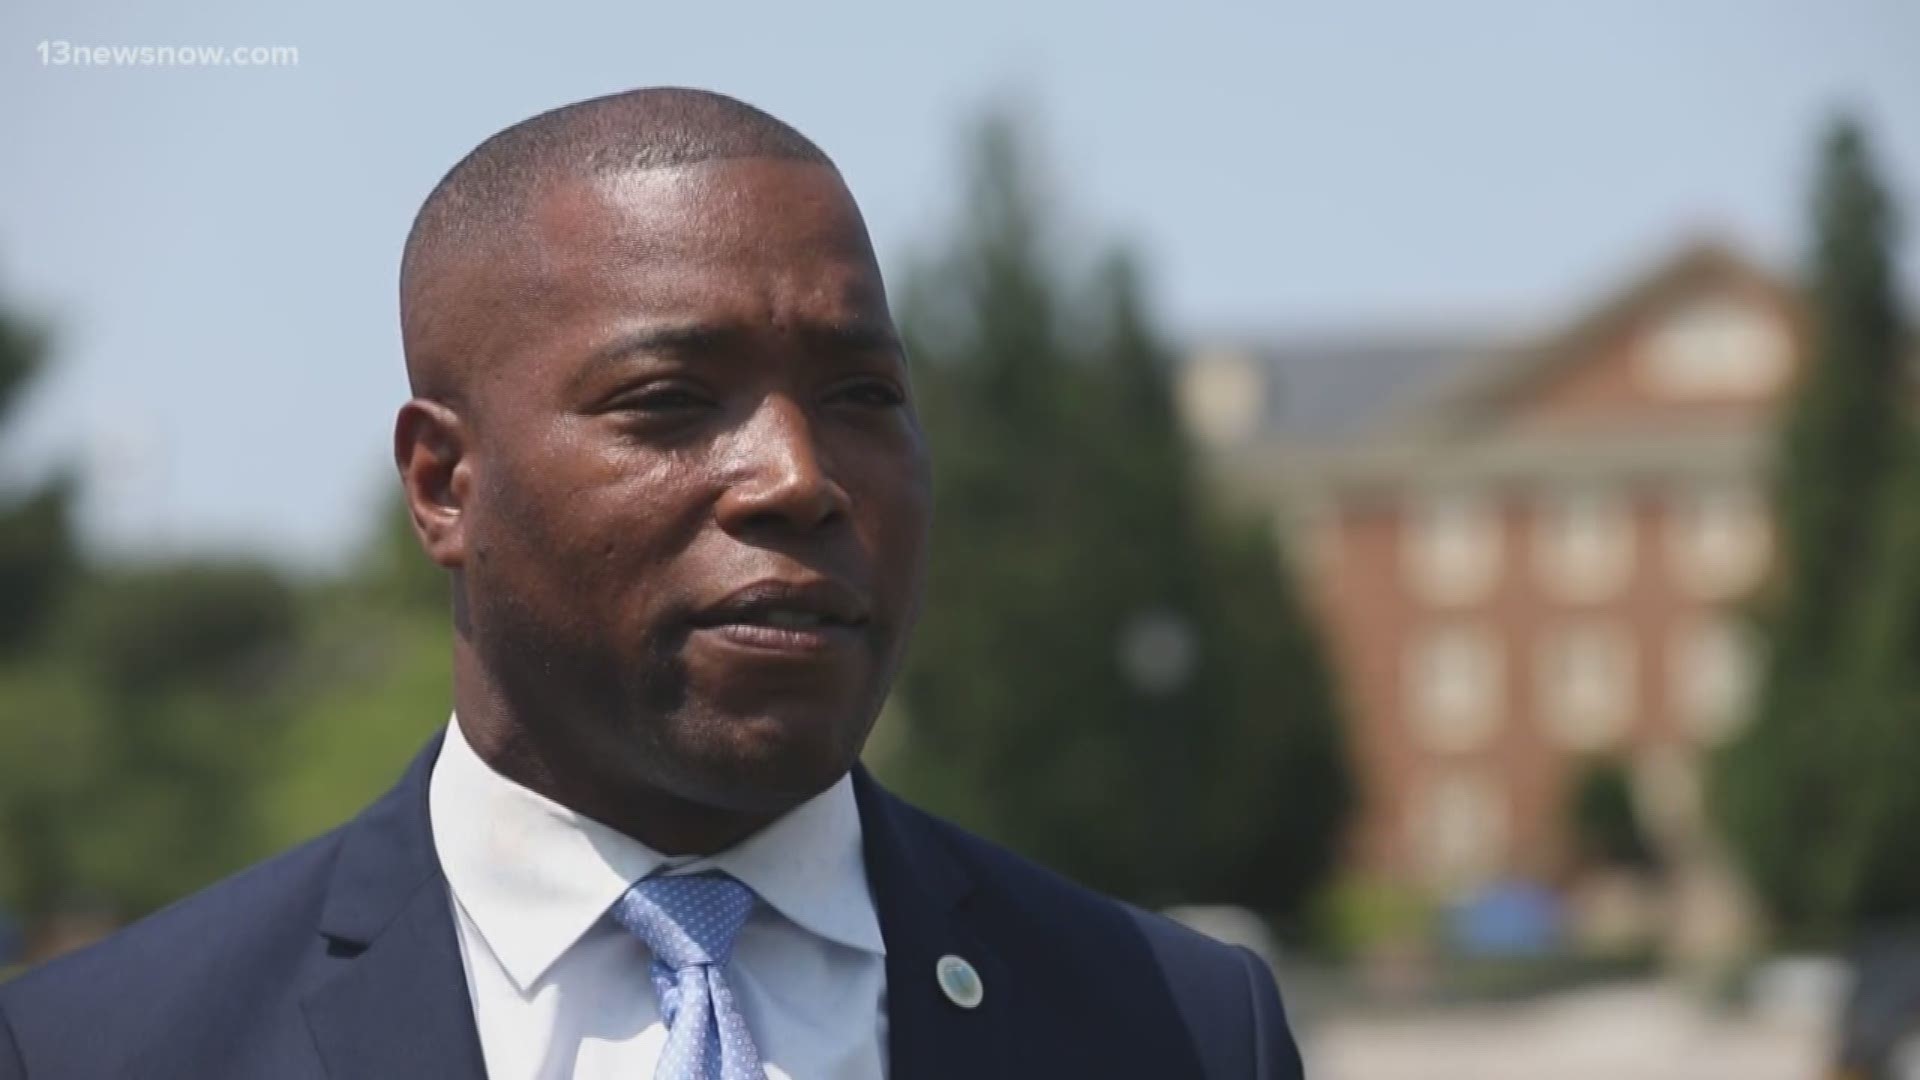 Virginia Beach Councilman Aaron Rouse said there's a reason he holds his current position and remembers his experience at Virginia Tech during that mass shooting.